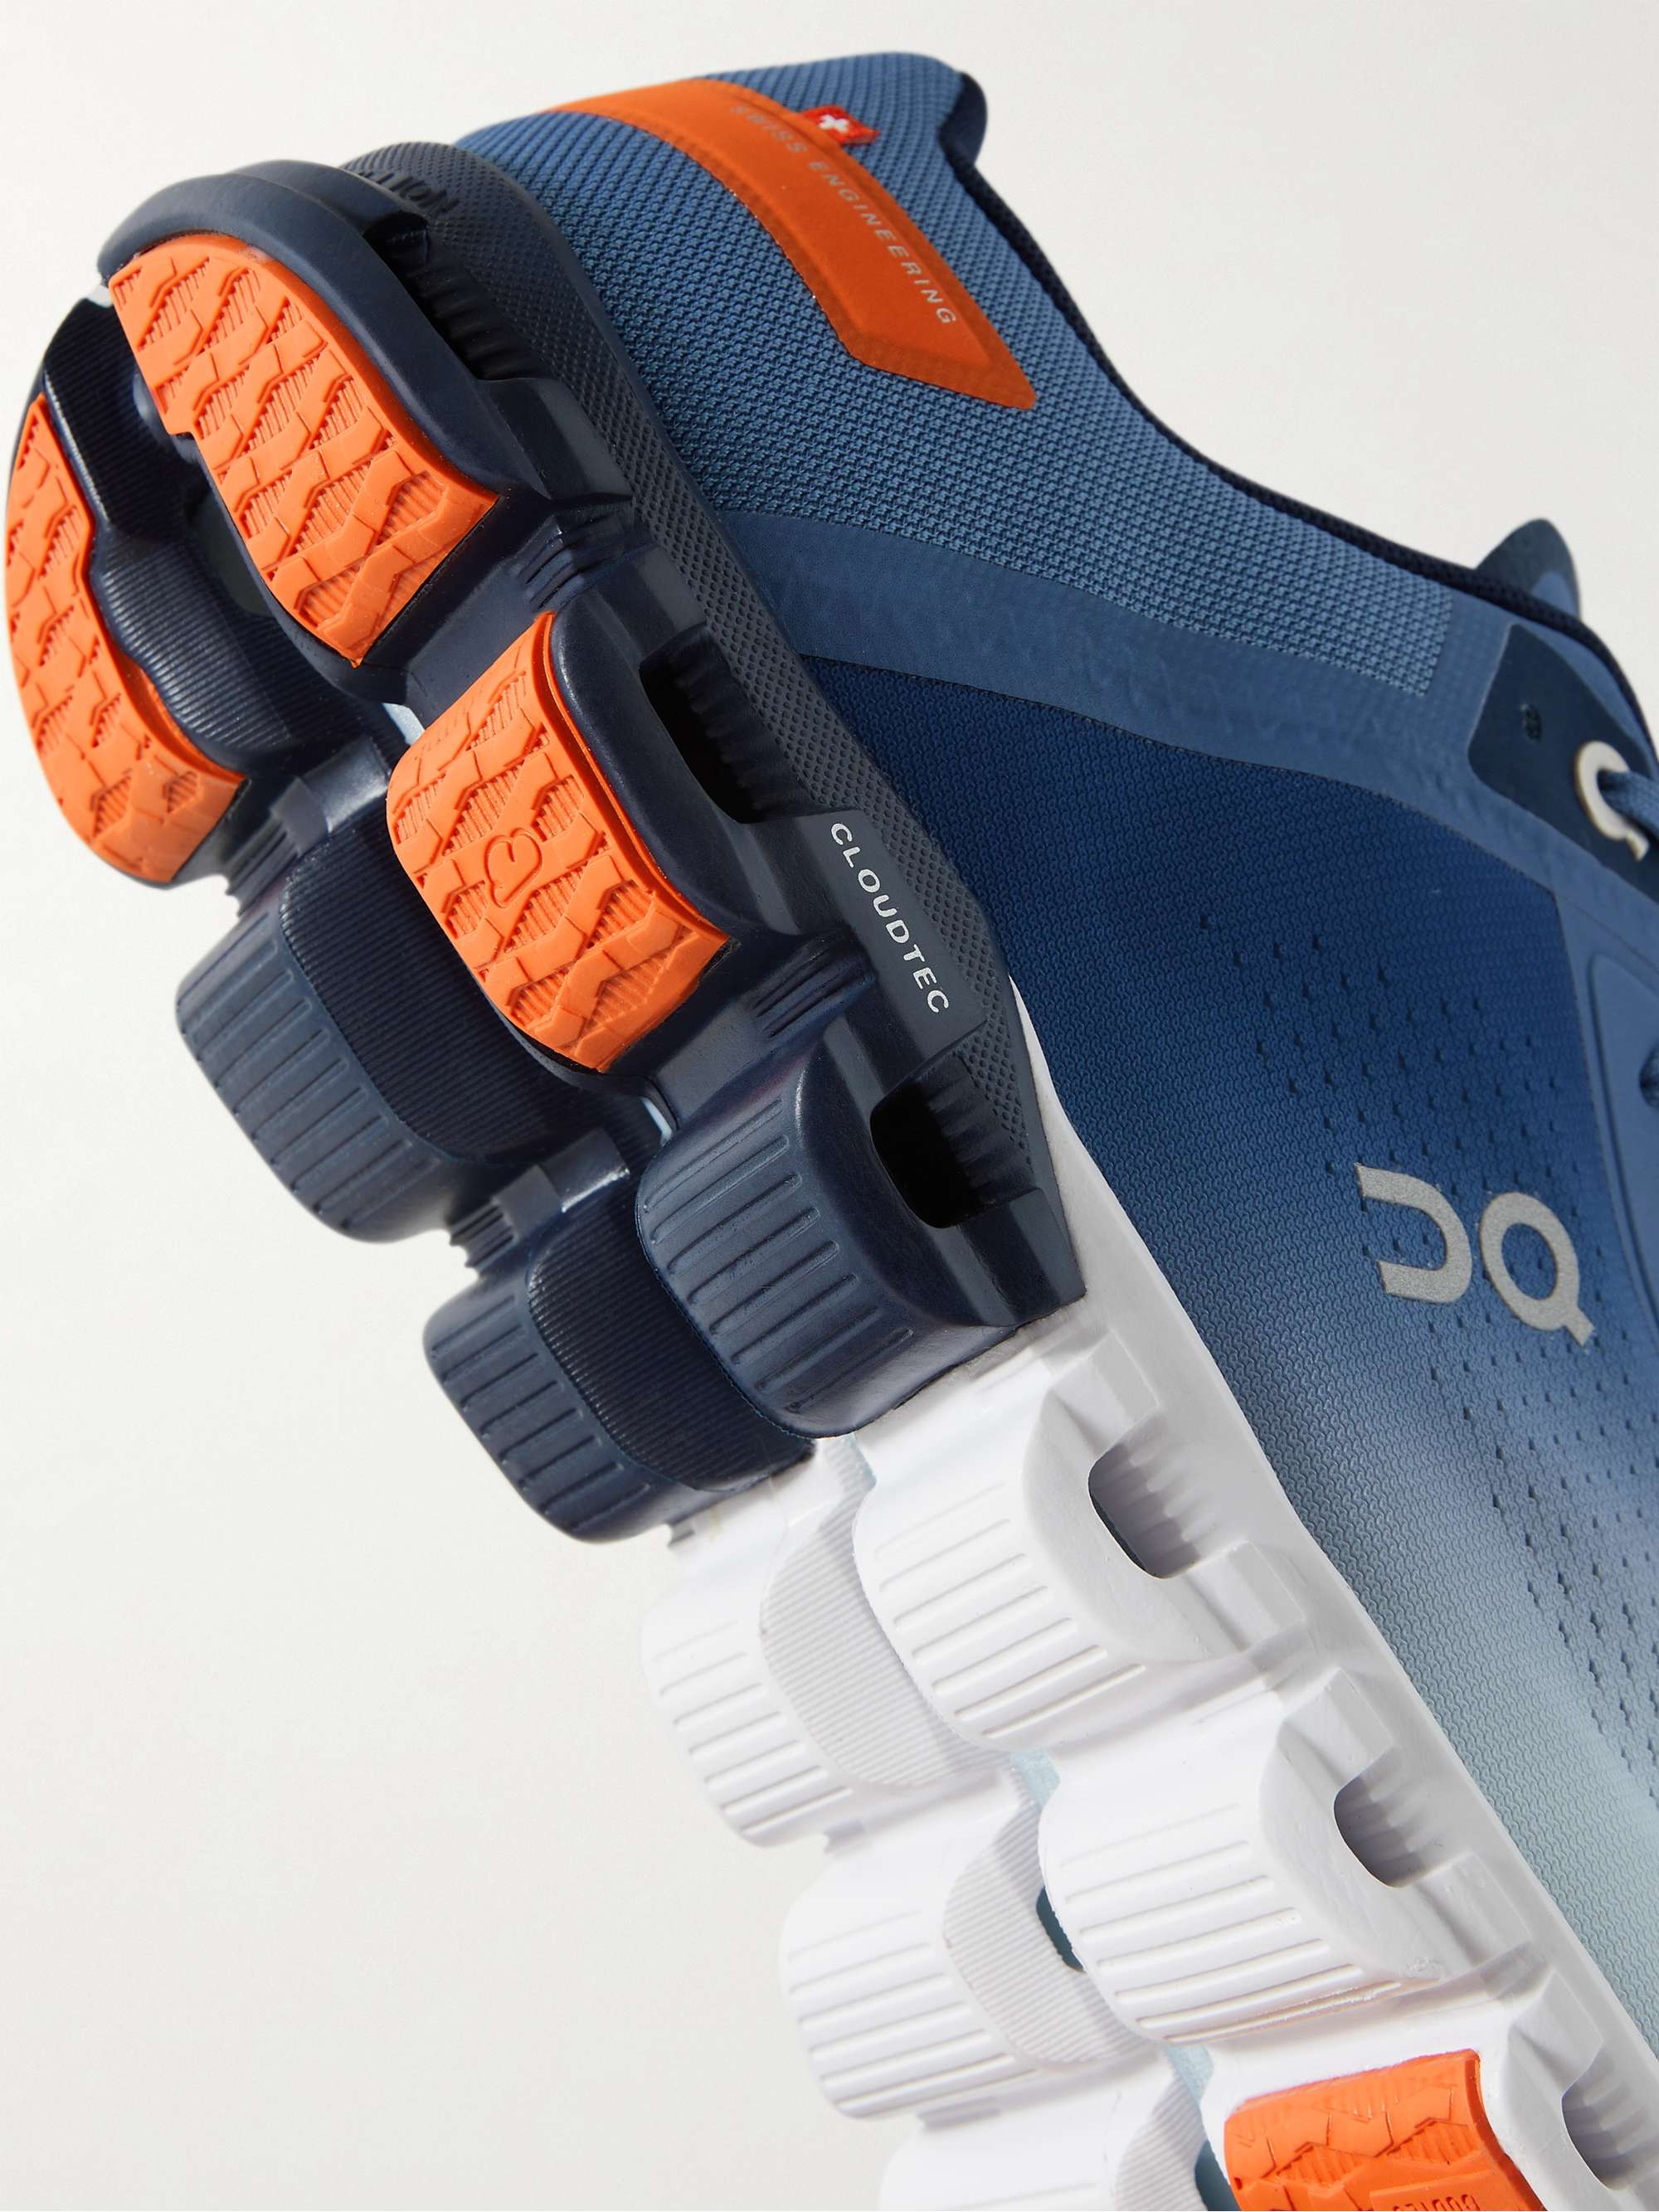 ON Cloudflow Rubber-Trimmed Recycled Mesh Running Sneakers